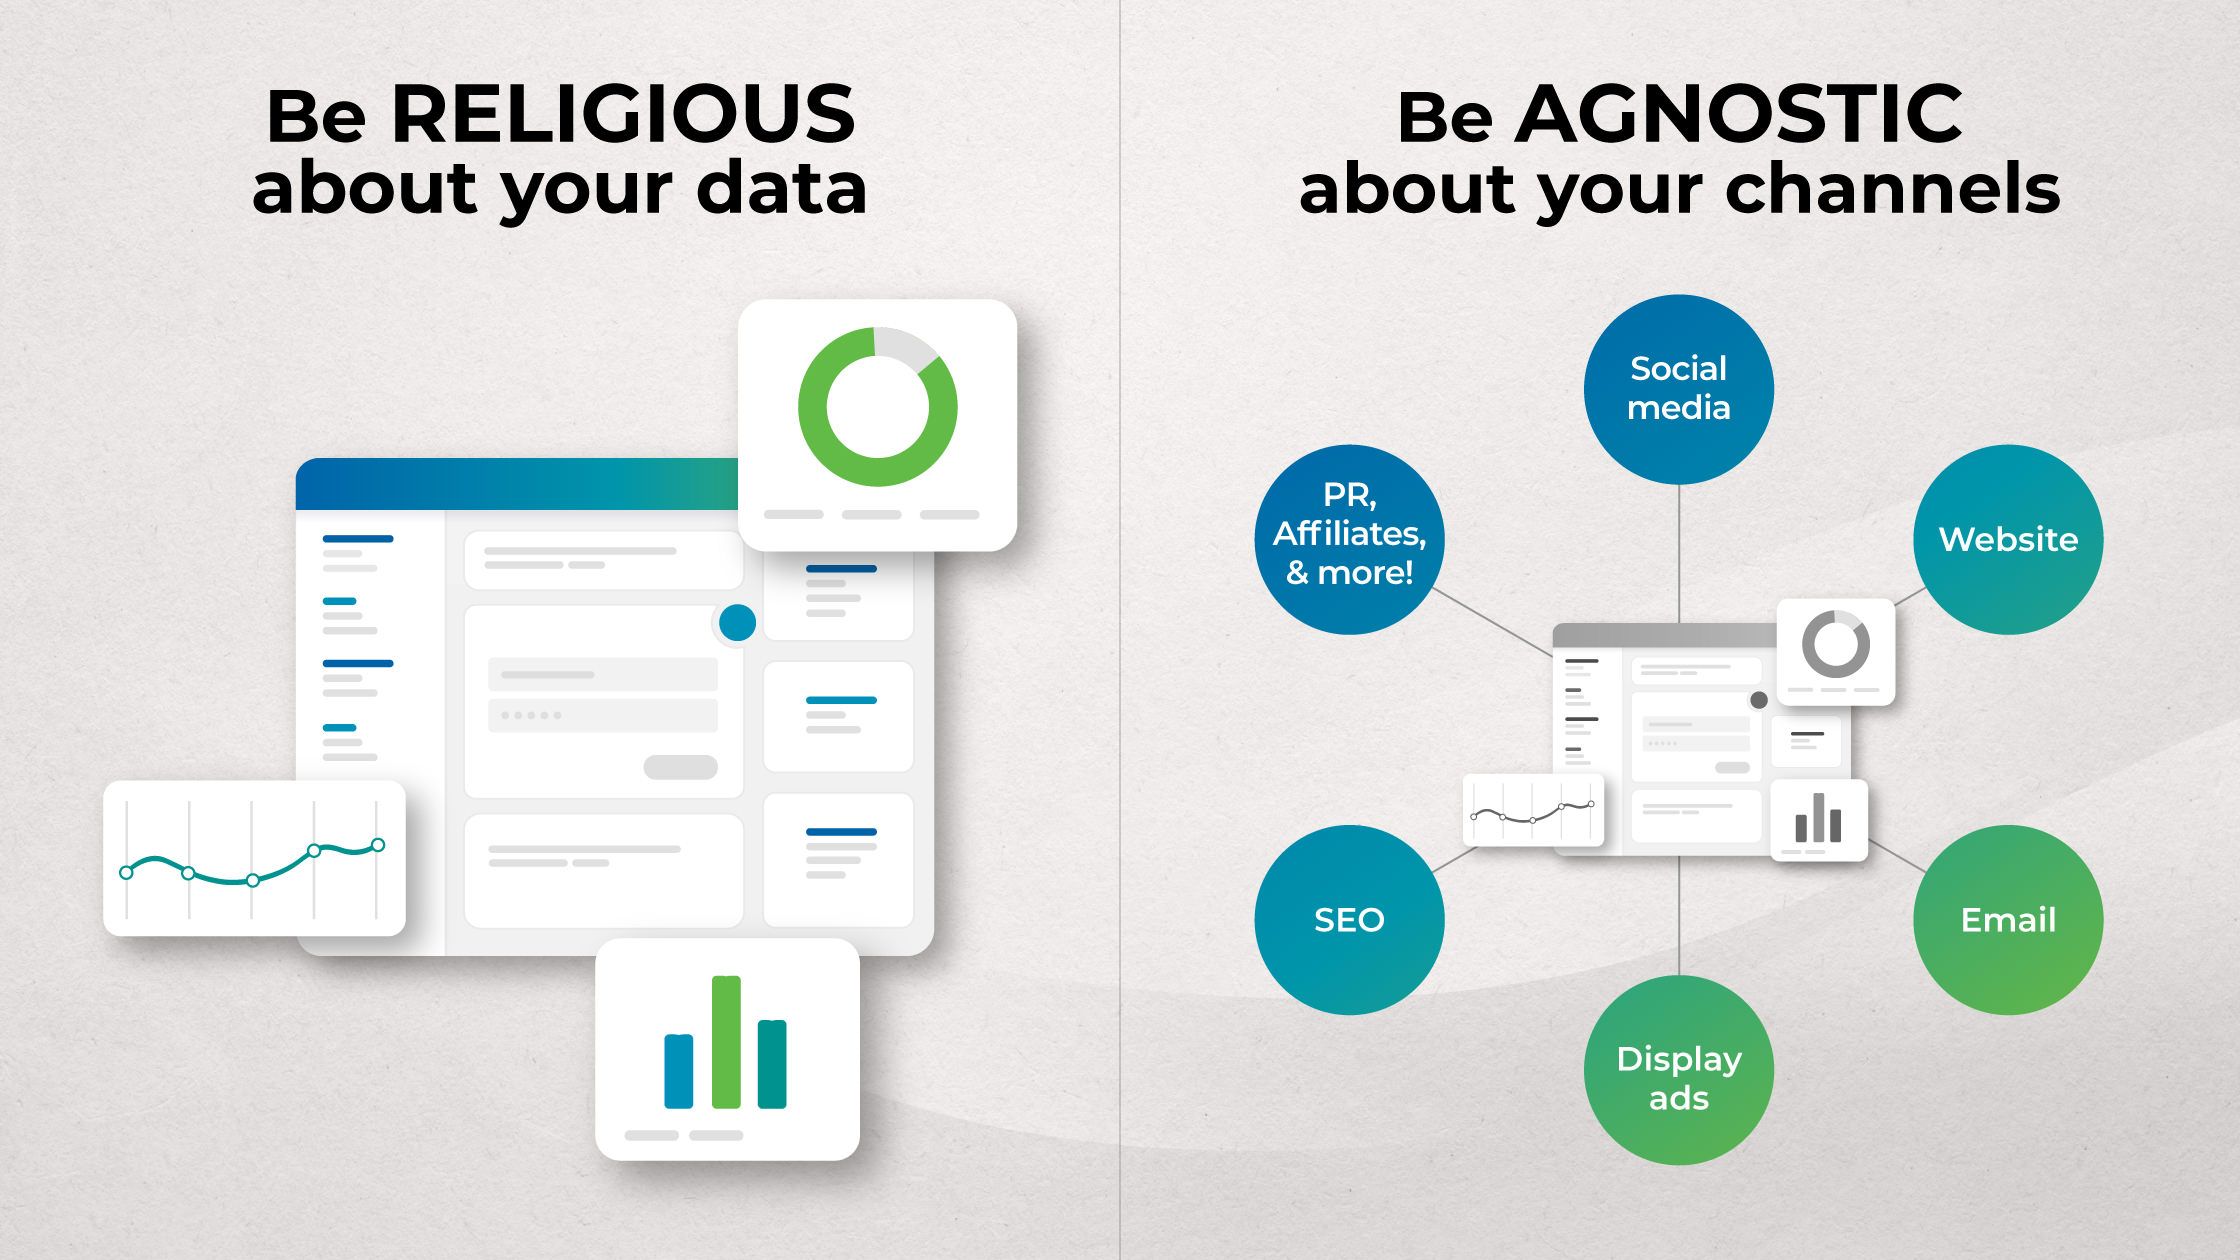 Be religious about your data, be agnostic about your channels